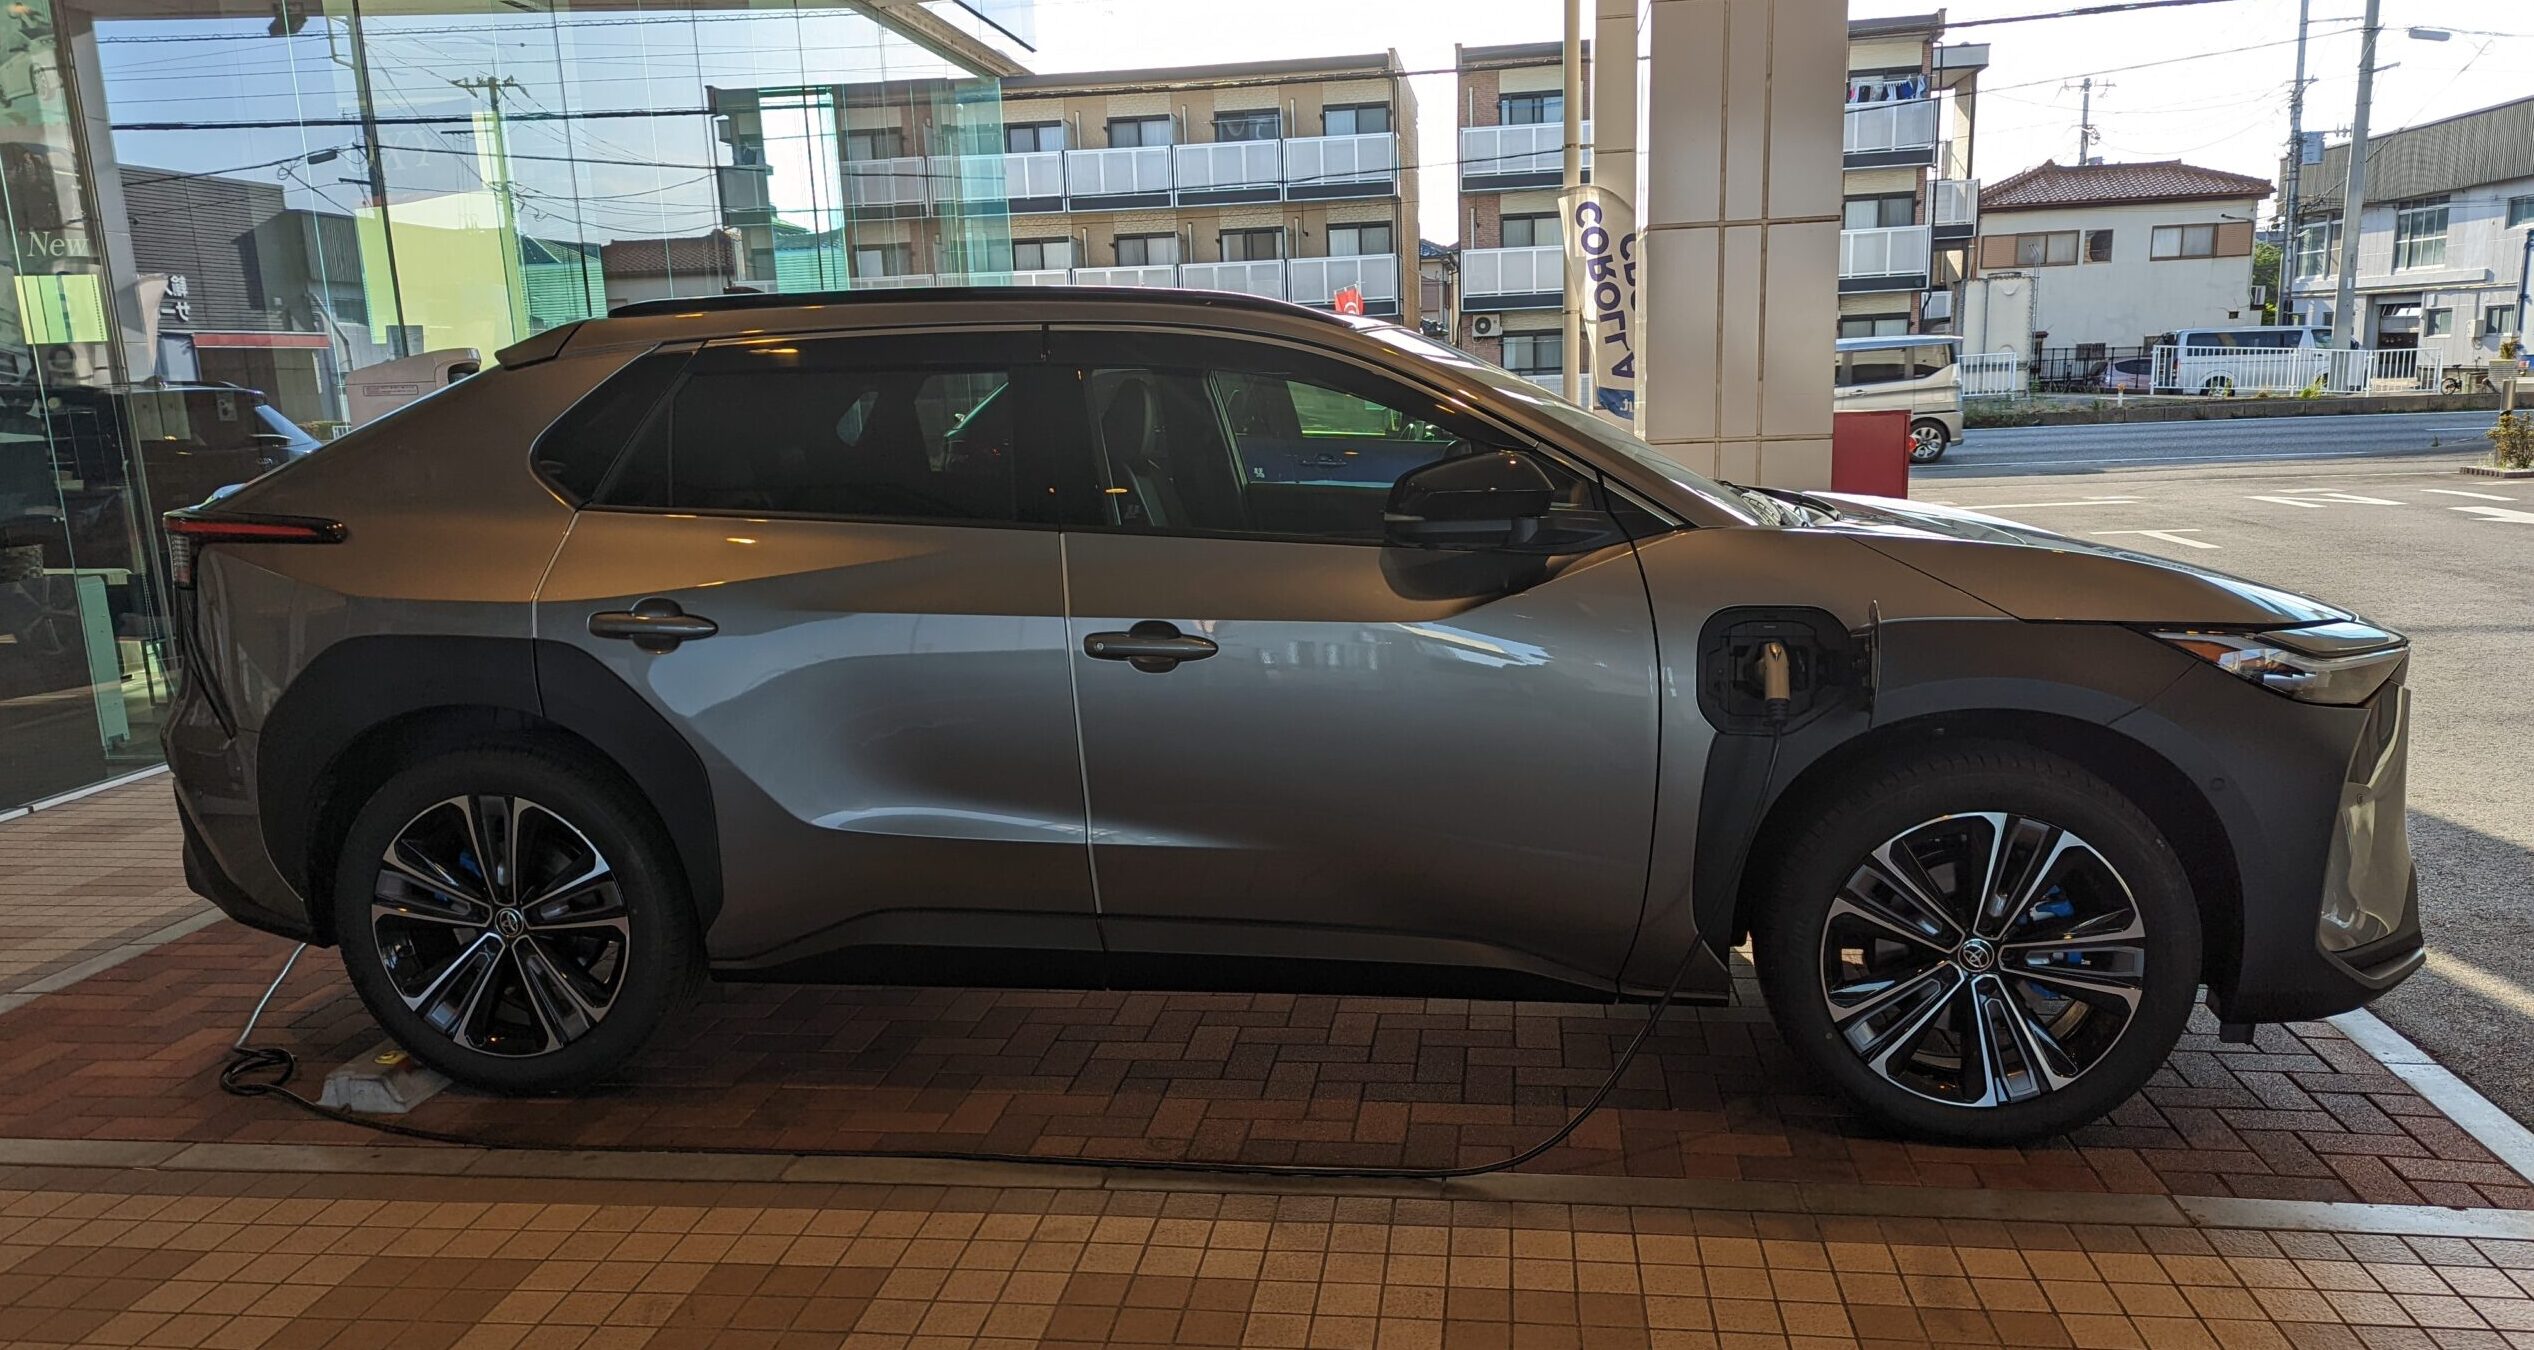 TOYOTA bZ4X エレクトリックライフ　ElECTRICLIFE.JP